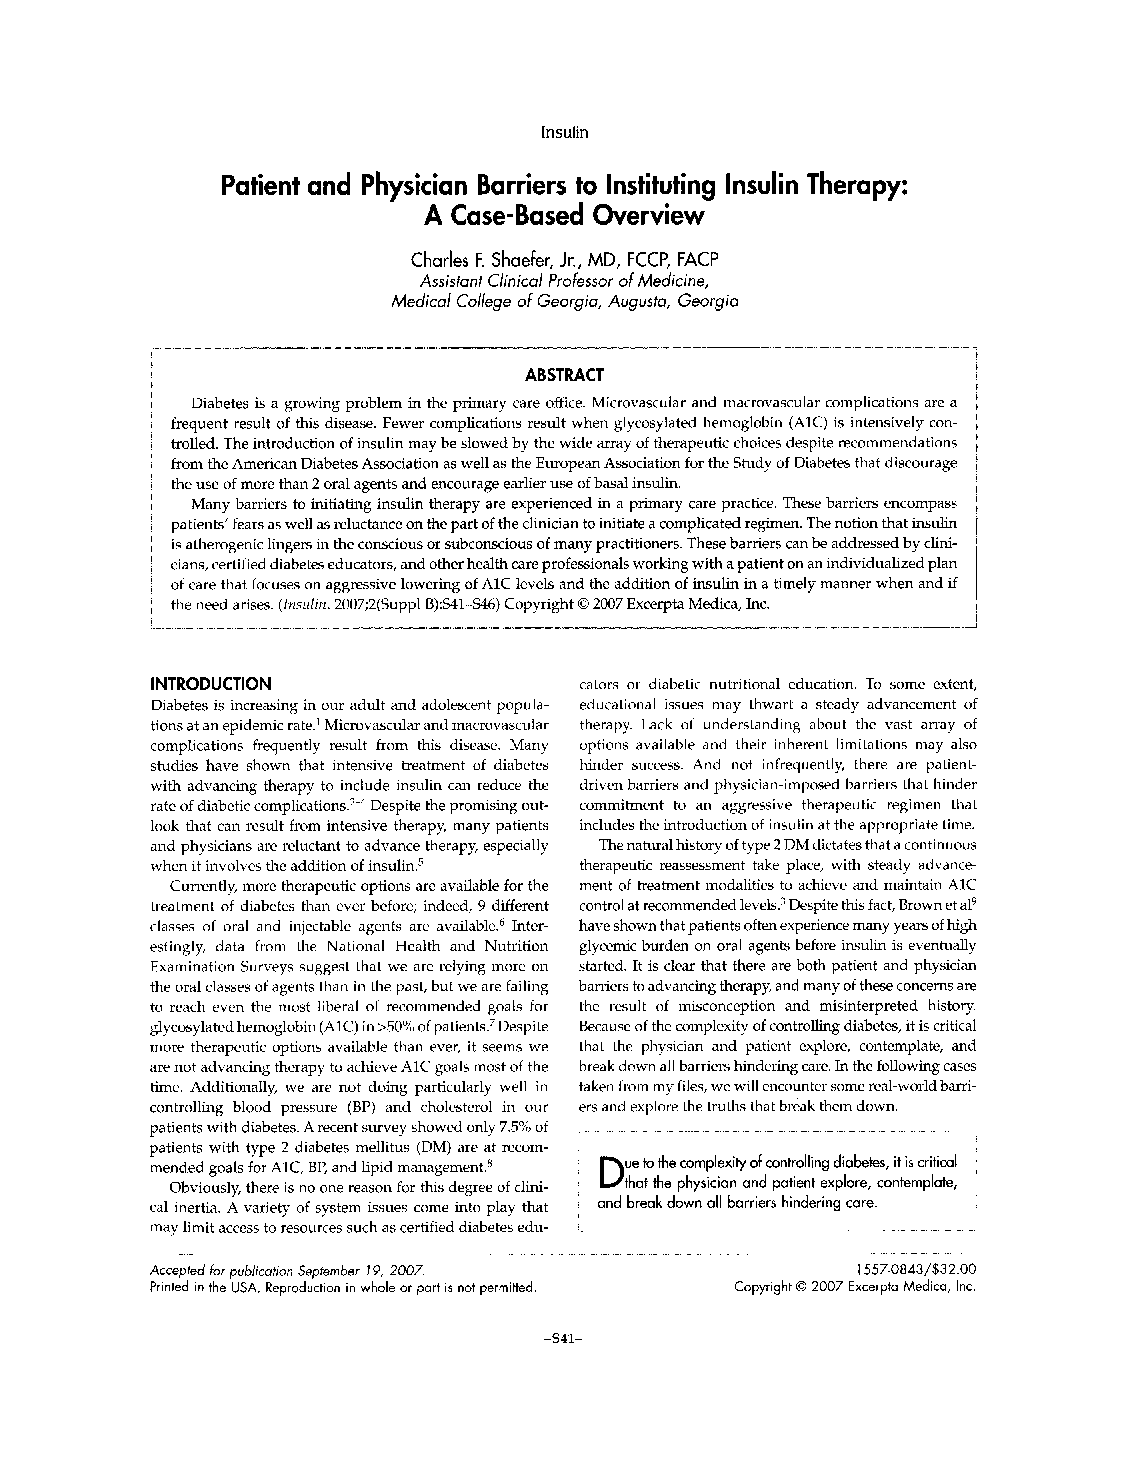 Patient and Physician Barriers to Instituting Insulin Therapy: A Case-Based Overview